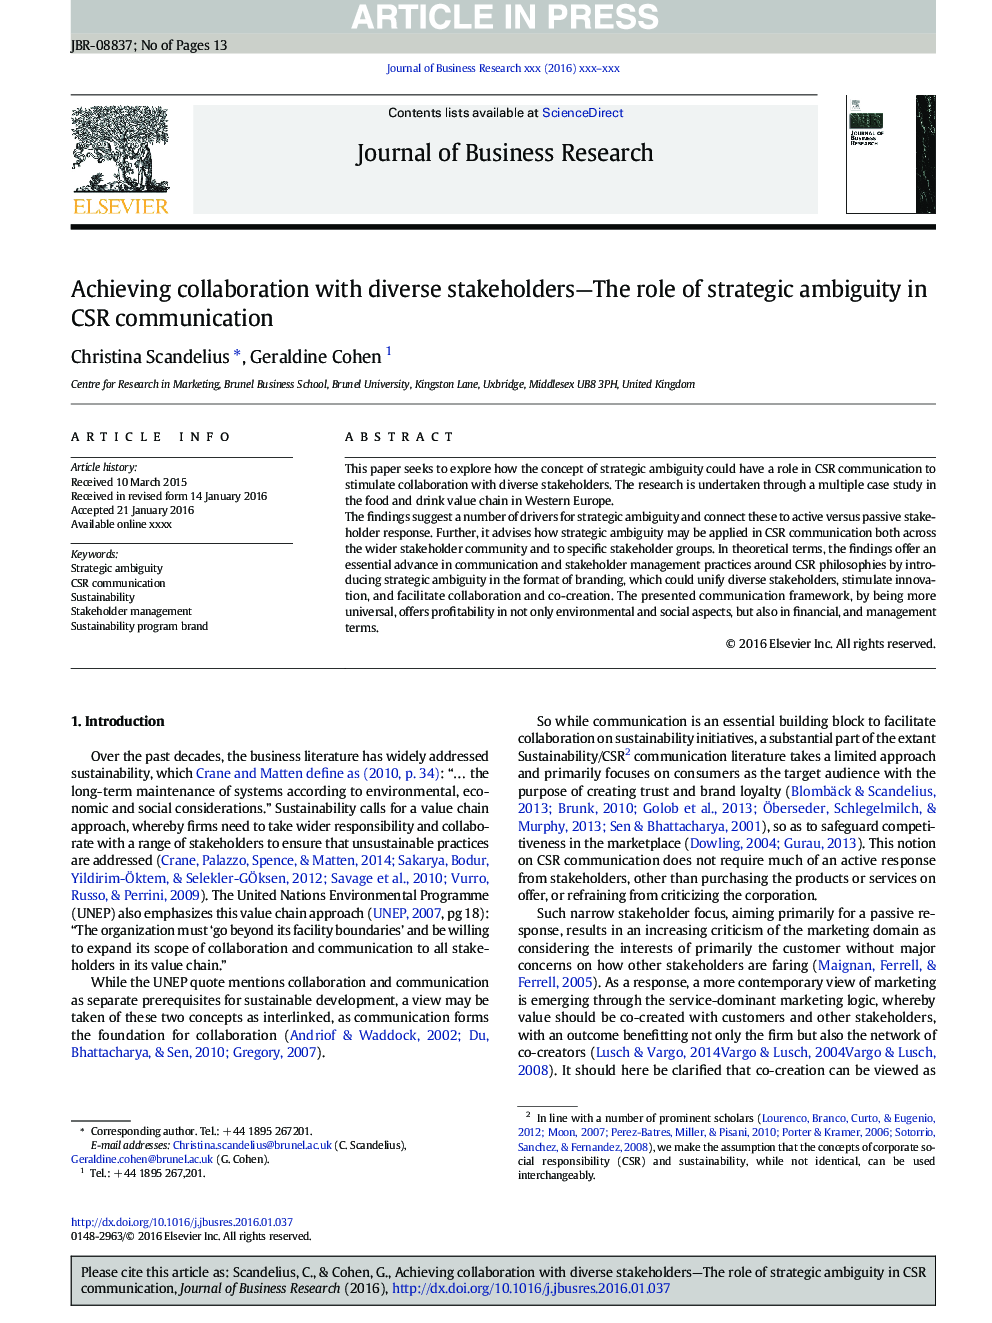 Achieving collaboration with diverse stakeholders-The role of strategic ambiguity in CSR communication